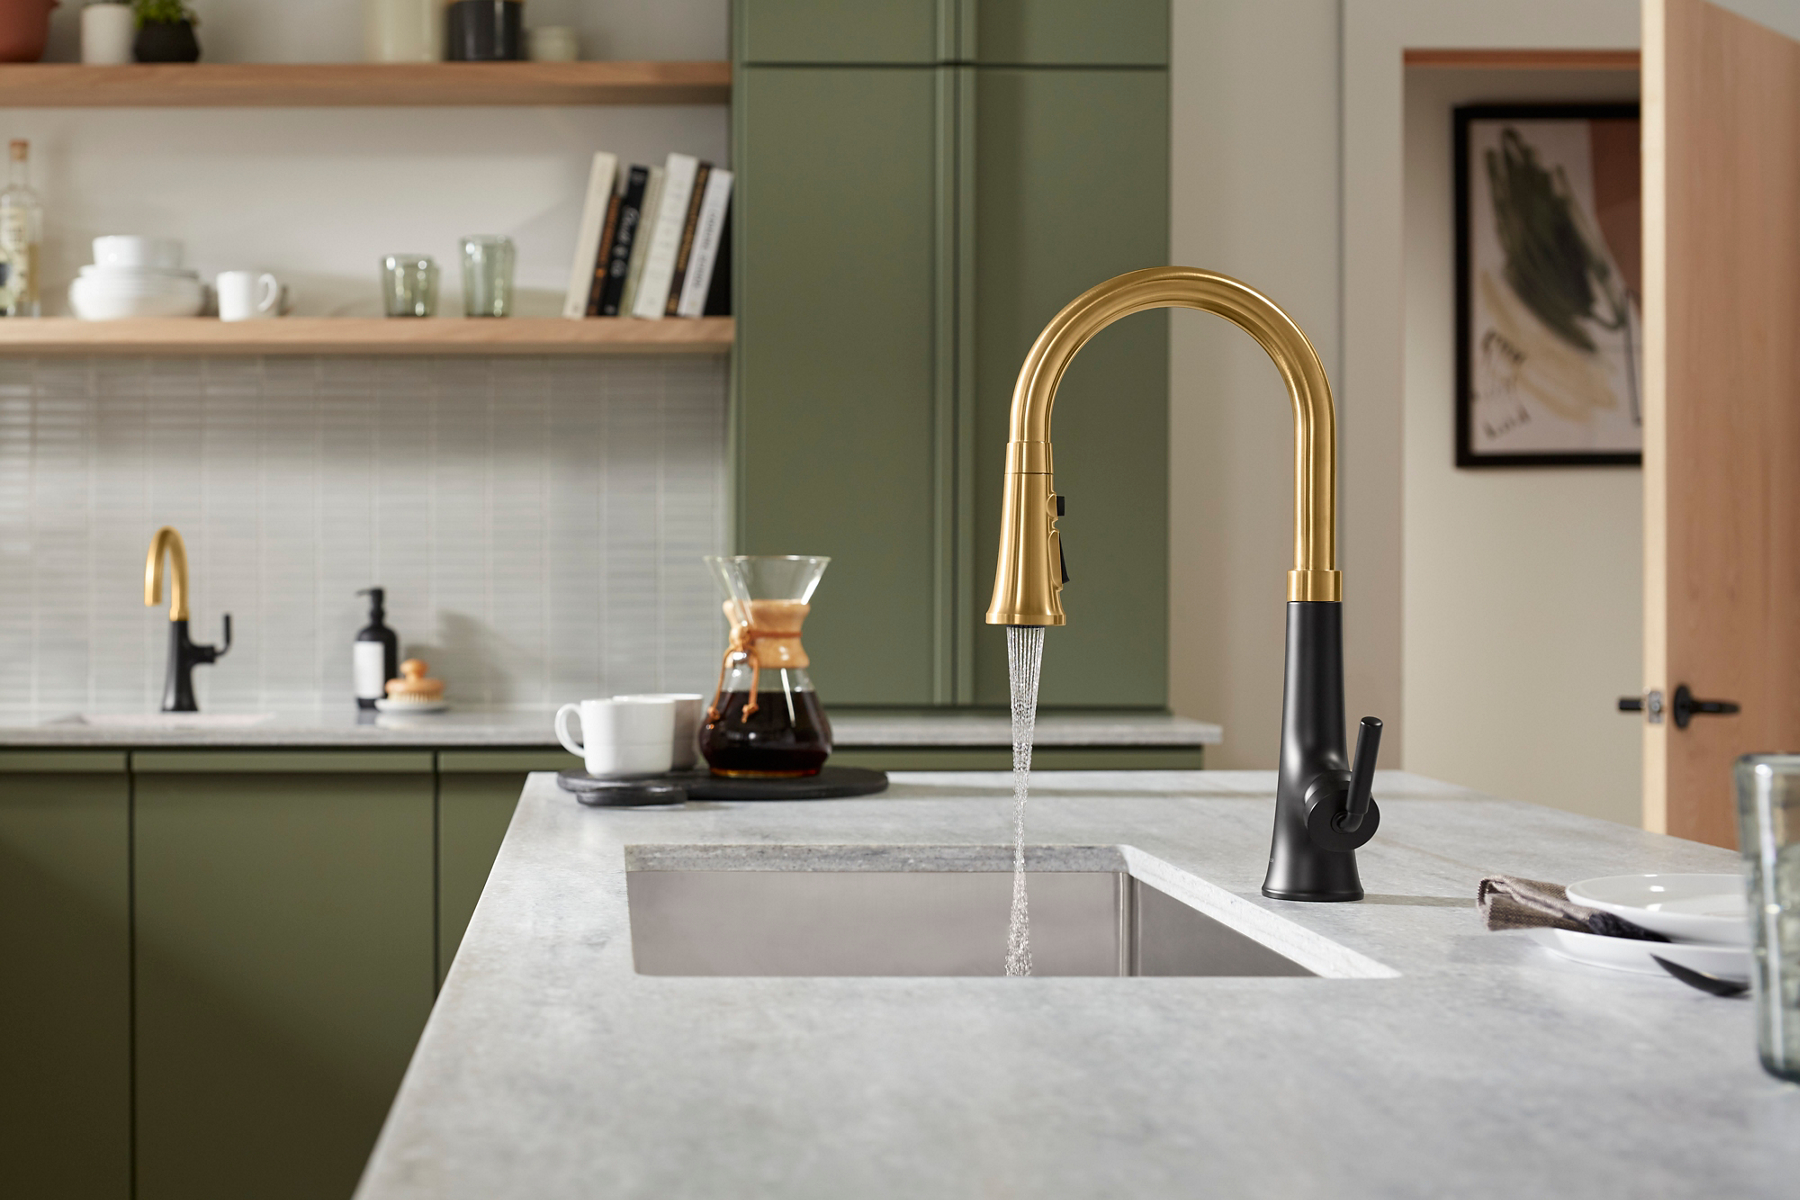 A side view of water flowing from a KOHLER Tone kitchen faucet with single lever handle, into a Strive undermount sink.